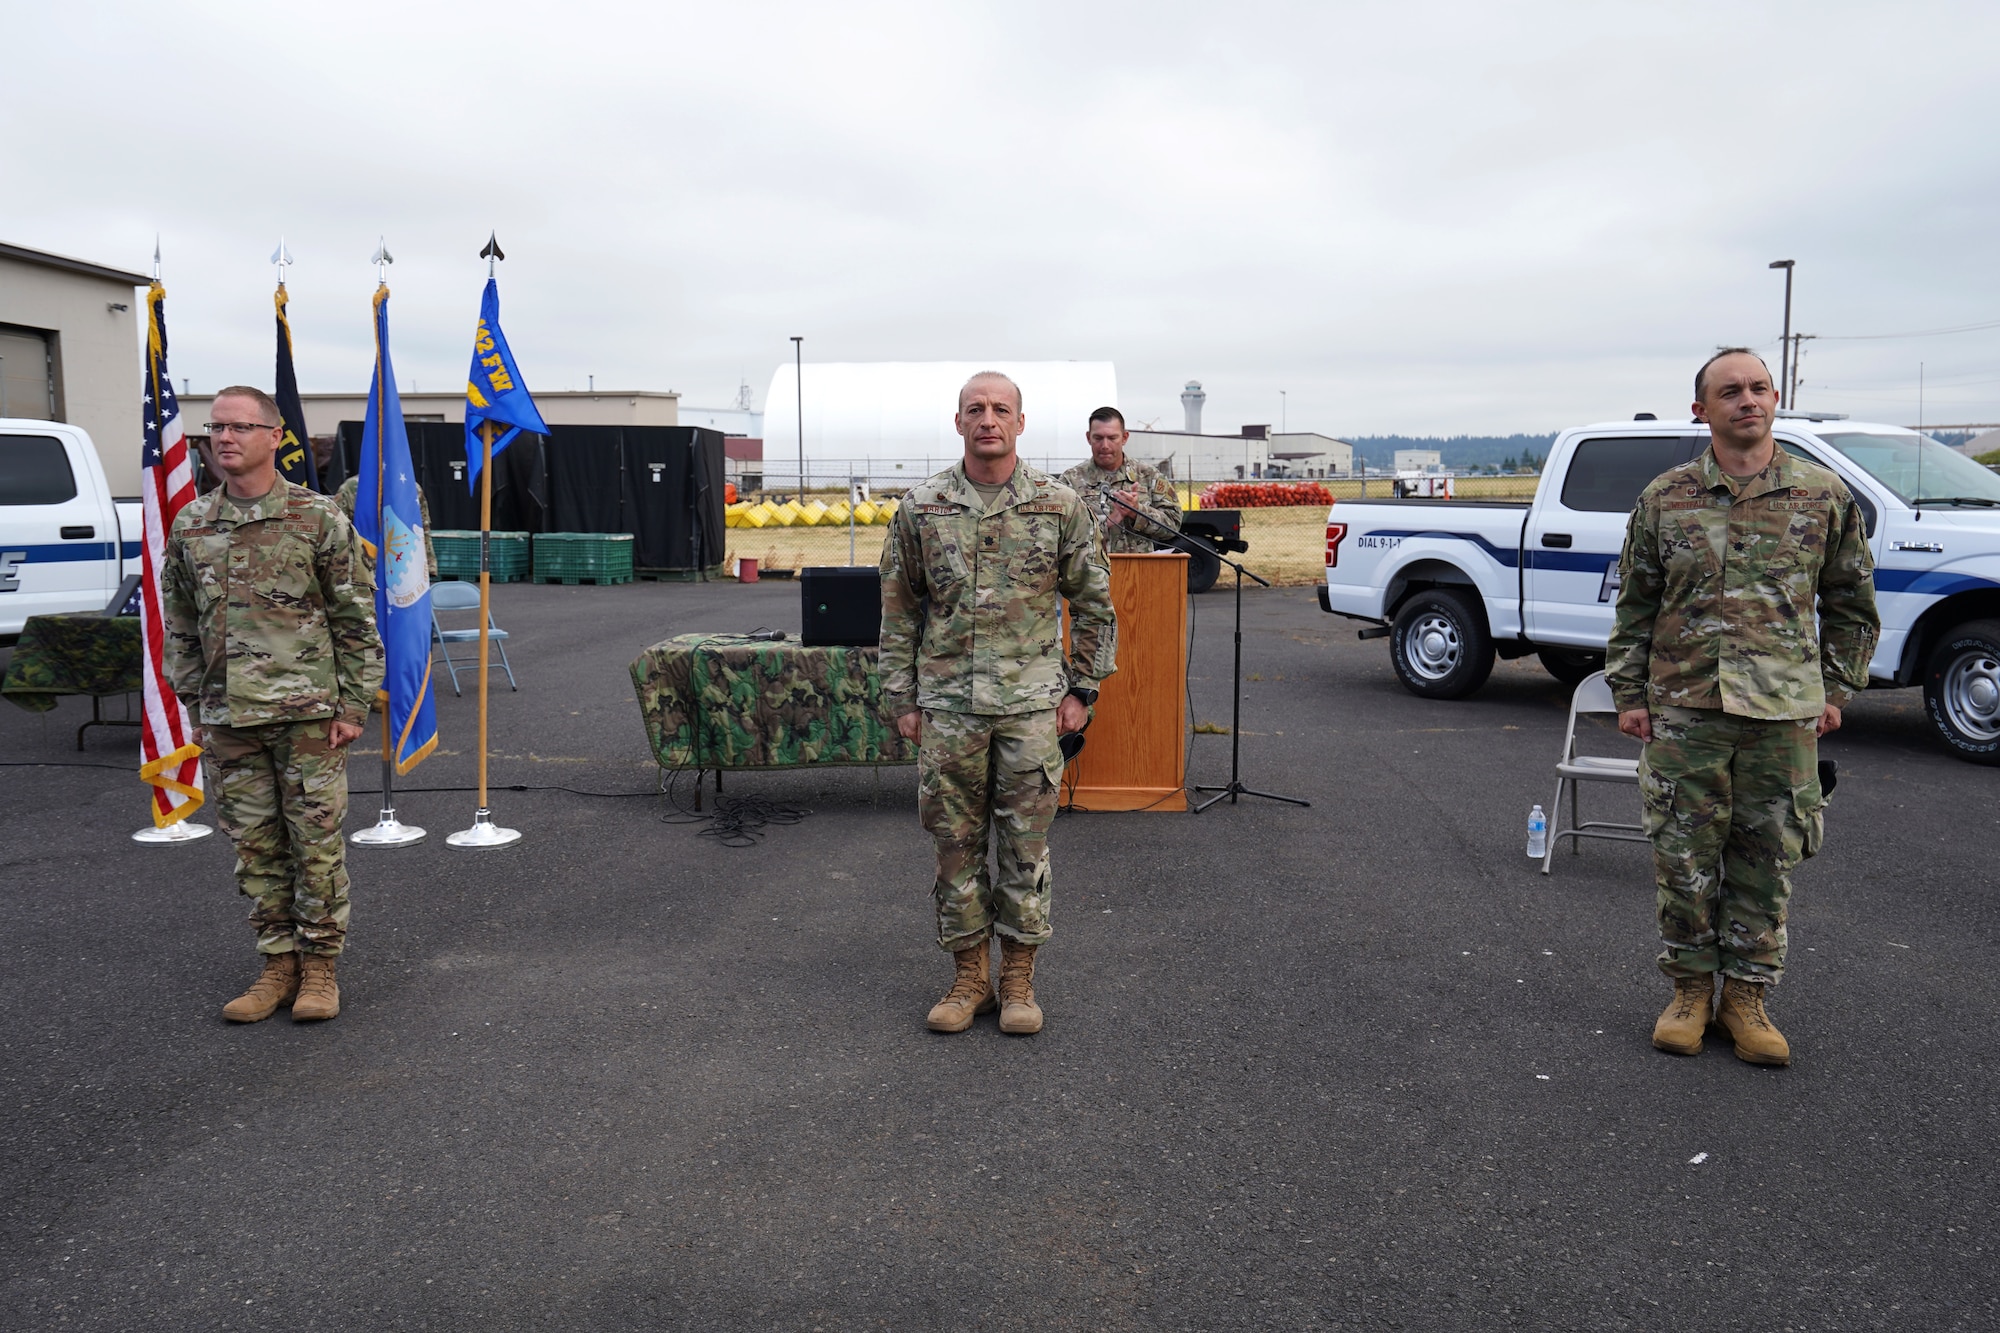 U.S. Air Force Lt. Col. Ryan Barton, center, assumes command of the 142nd Security Forces Squadron from Lt. Col. Caleb Westfall, right, during a change of command ceremony at the Portland Air National Guard Base, Ore., Aug. 2, 2020. Westfall retired directly after the change of command.